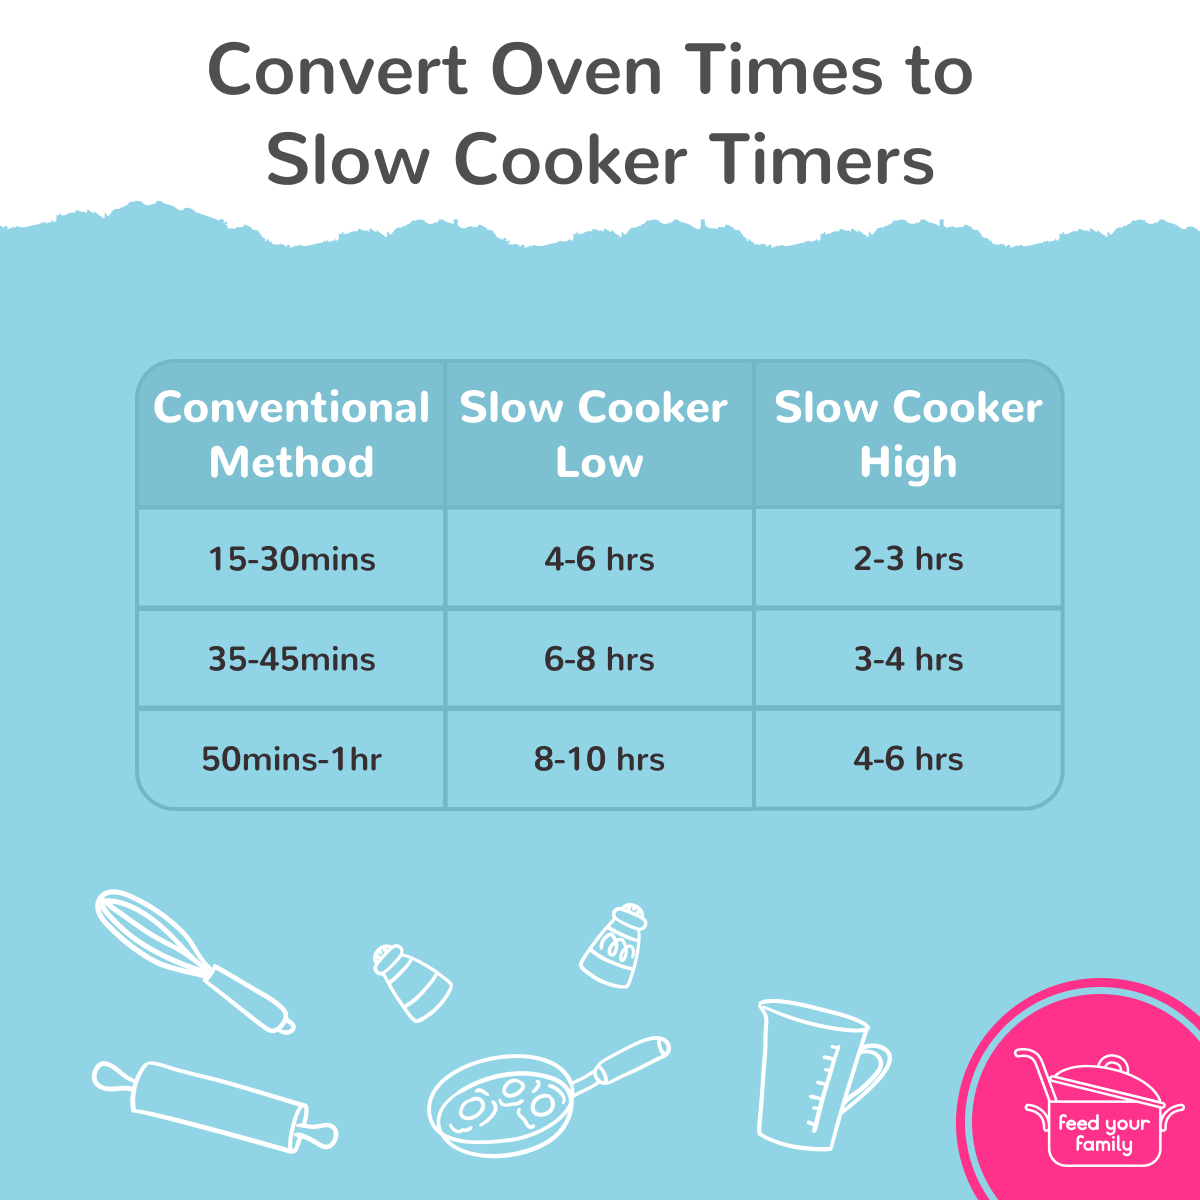 High enough slowed. Cooking time. Didn't turn on the Oven какое время. Chicken Cooking time at different temperatures. Cooking timer PNG.